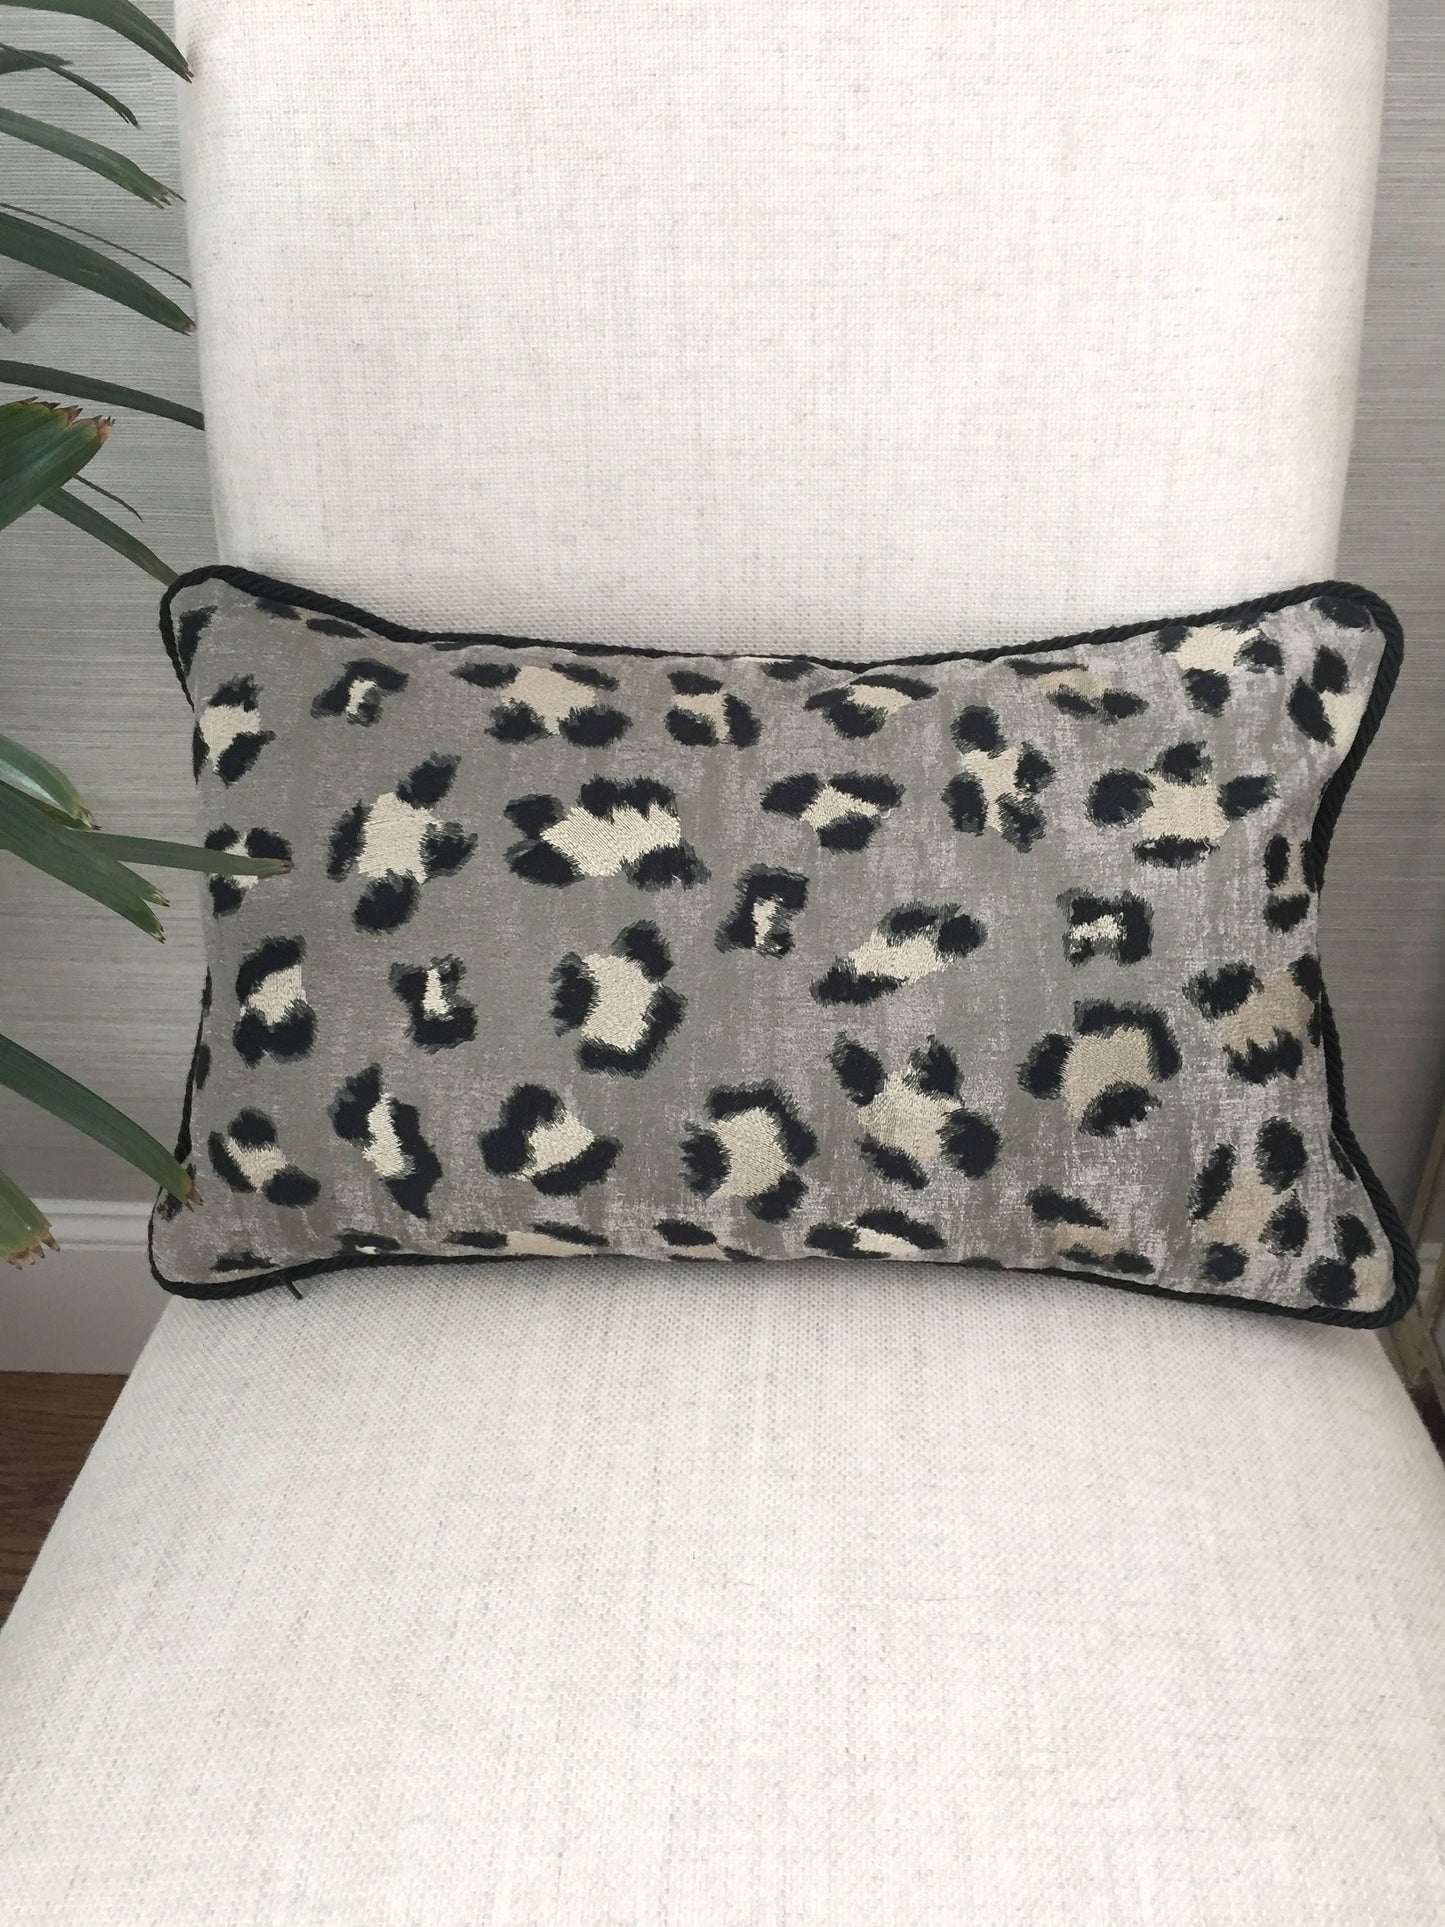 Scalamandre Broderie Leopard, pillow cover with trim, animal print cushion, grey and black pillow cover, accent pillow , throw pillow